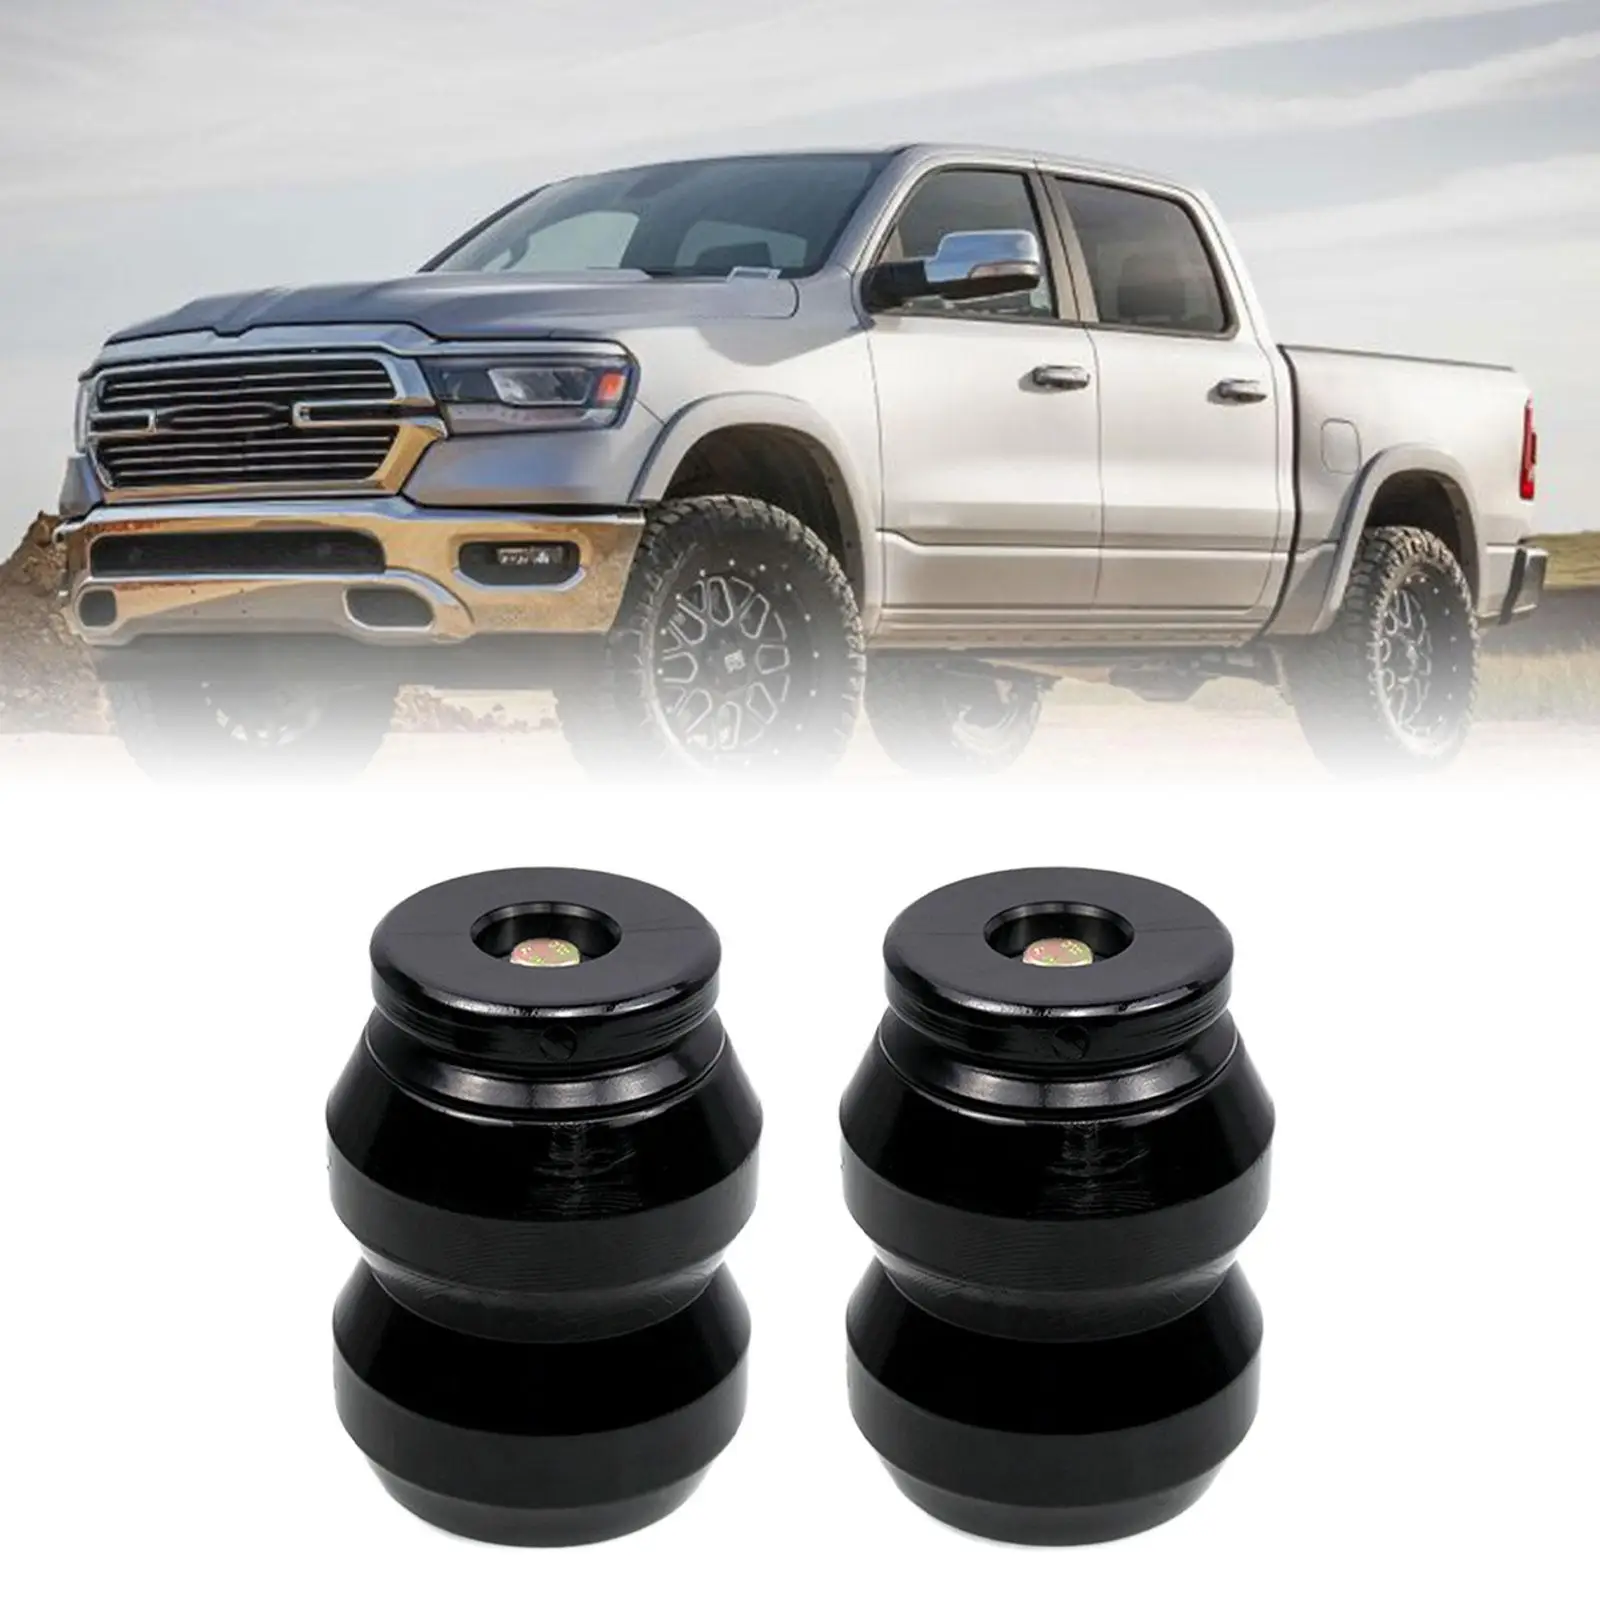 2x Suspension Enhancement System DR1500dq Easy to Install Replace Parts for Dodge RAM 1500 2WD 4WD Automotive Accessories